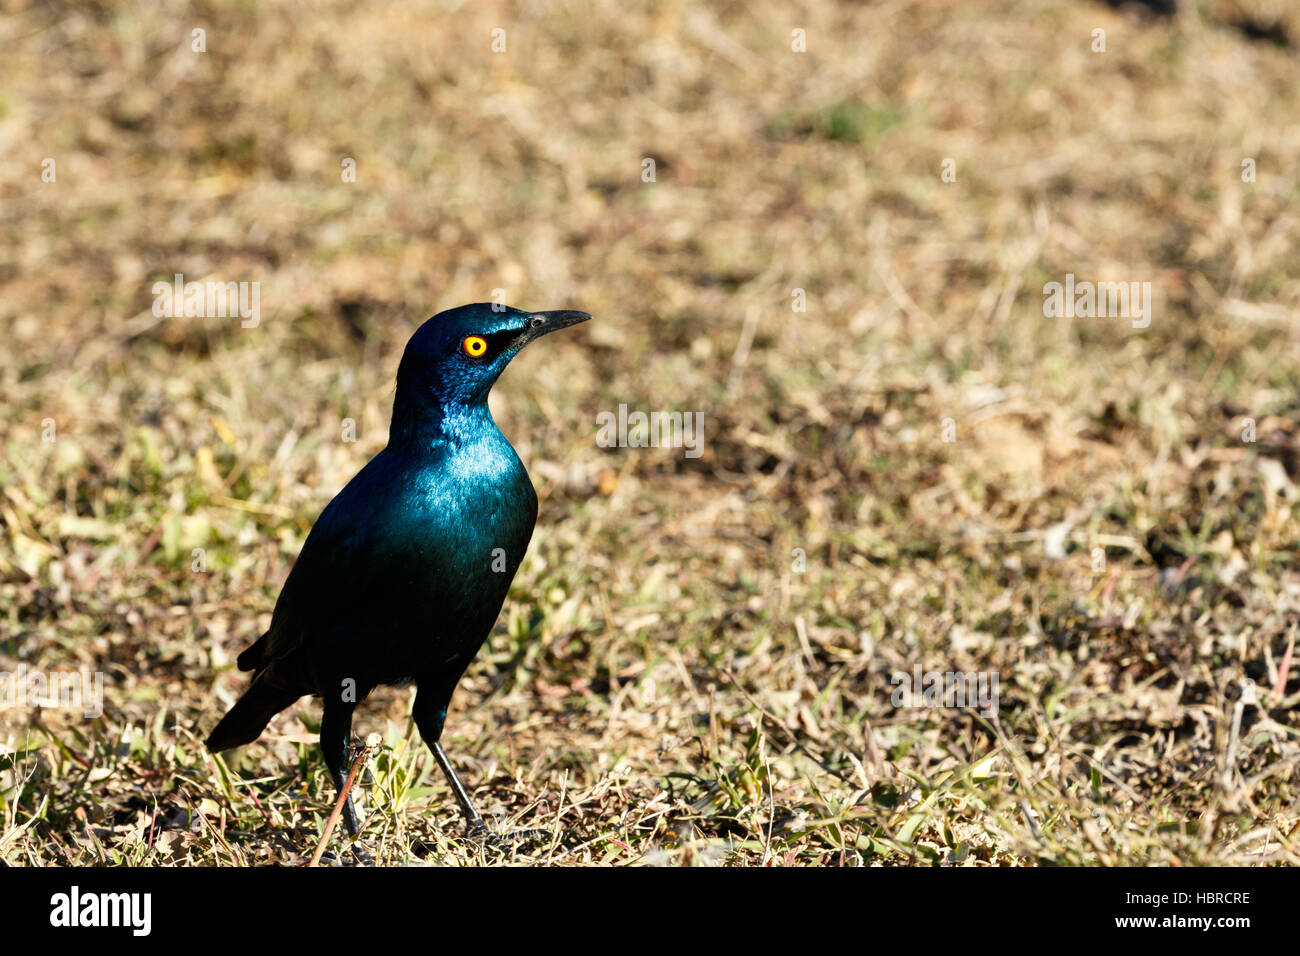 Red-shouldered glossy bird with yellow eye Stock Photo